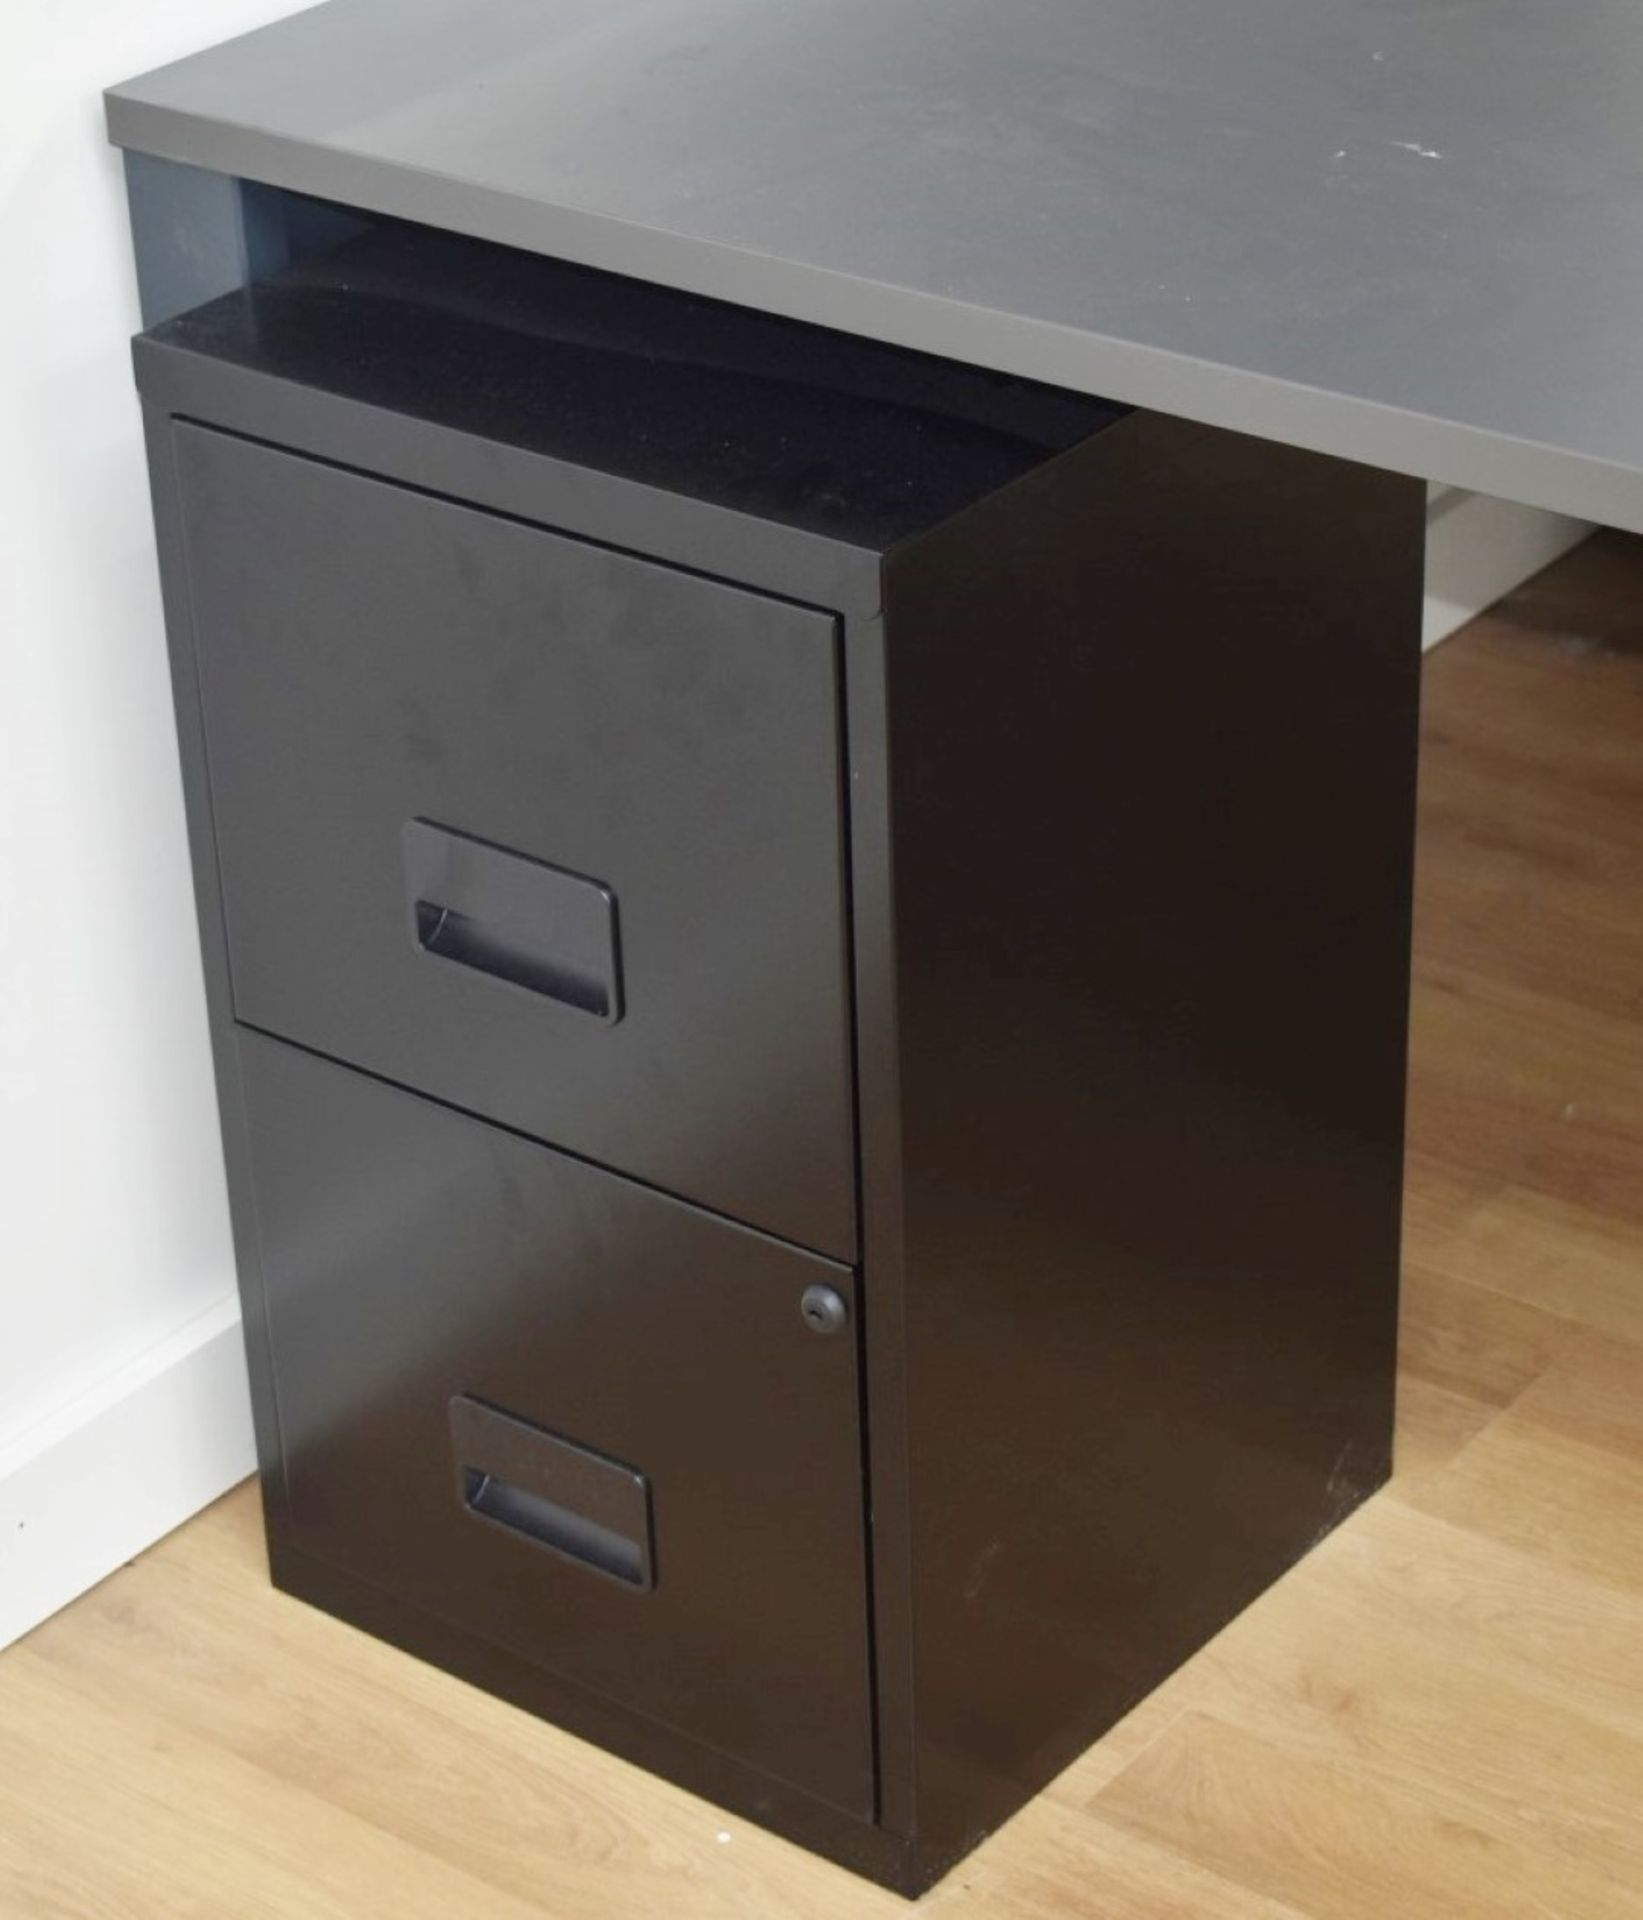 2 x Office Filing Cabinets With Two Drawers & Keys - Black Metal Finish Suitable For Modern Offices